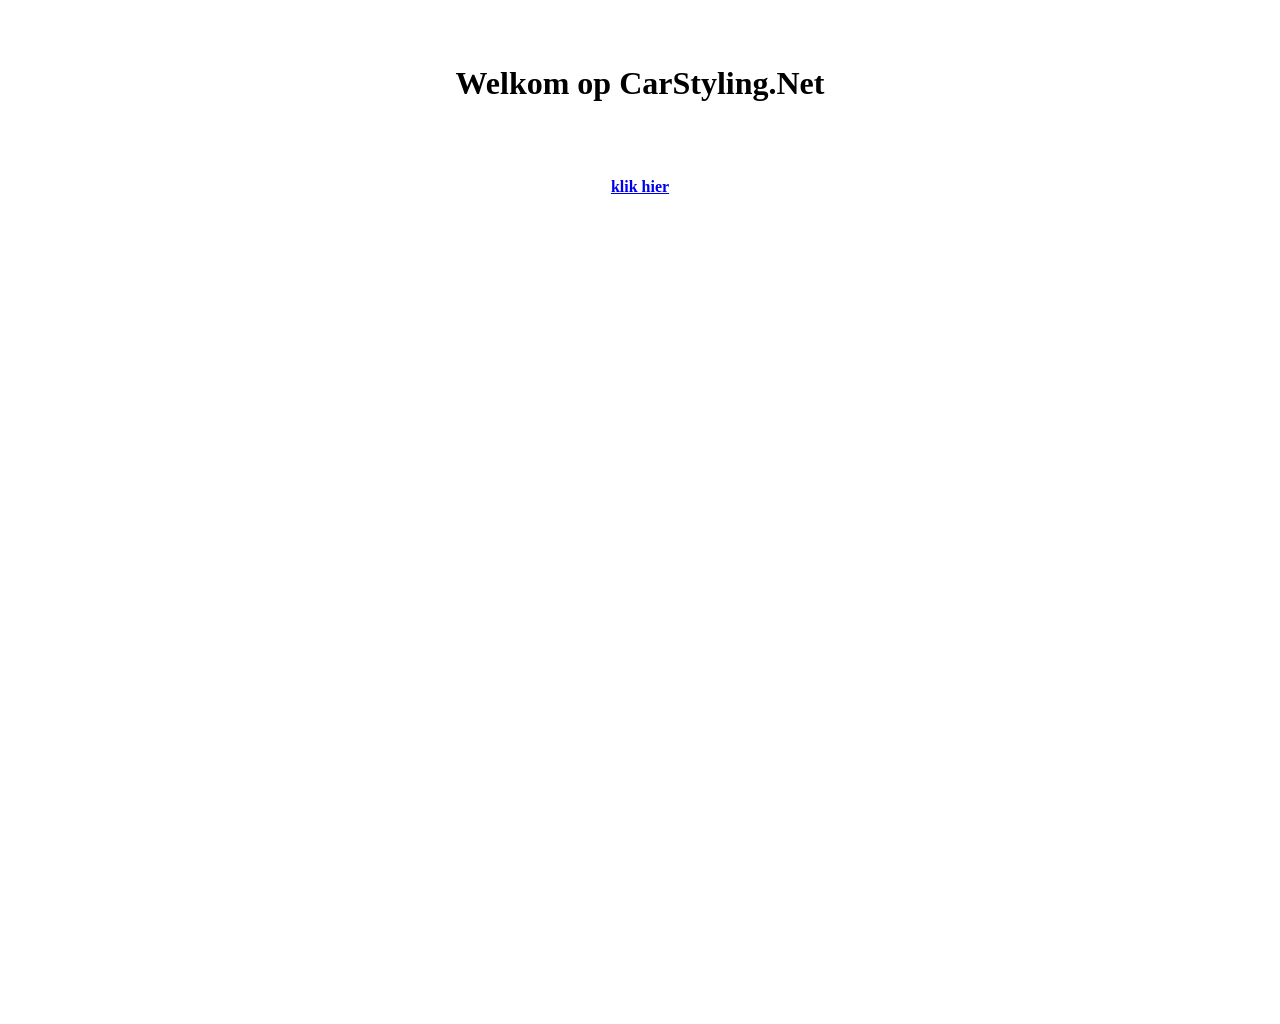 carstyling.net